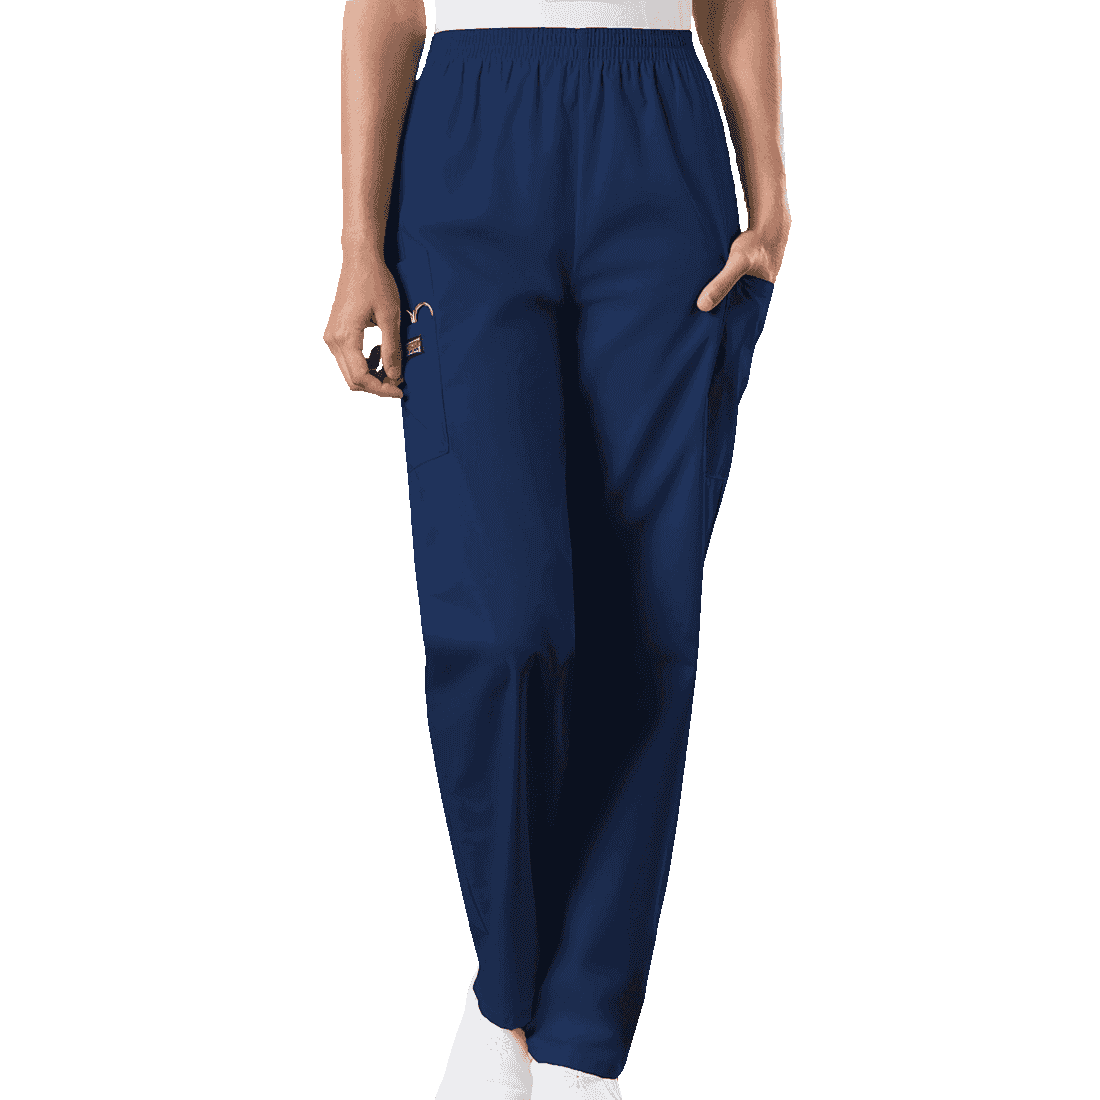 Women's Pull-On Tapered Scrub Trousers 4200 Navy